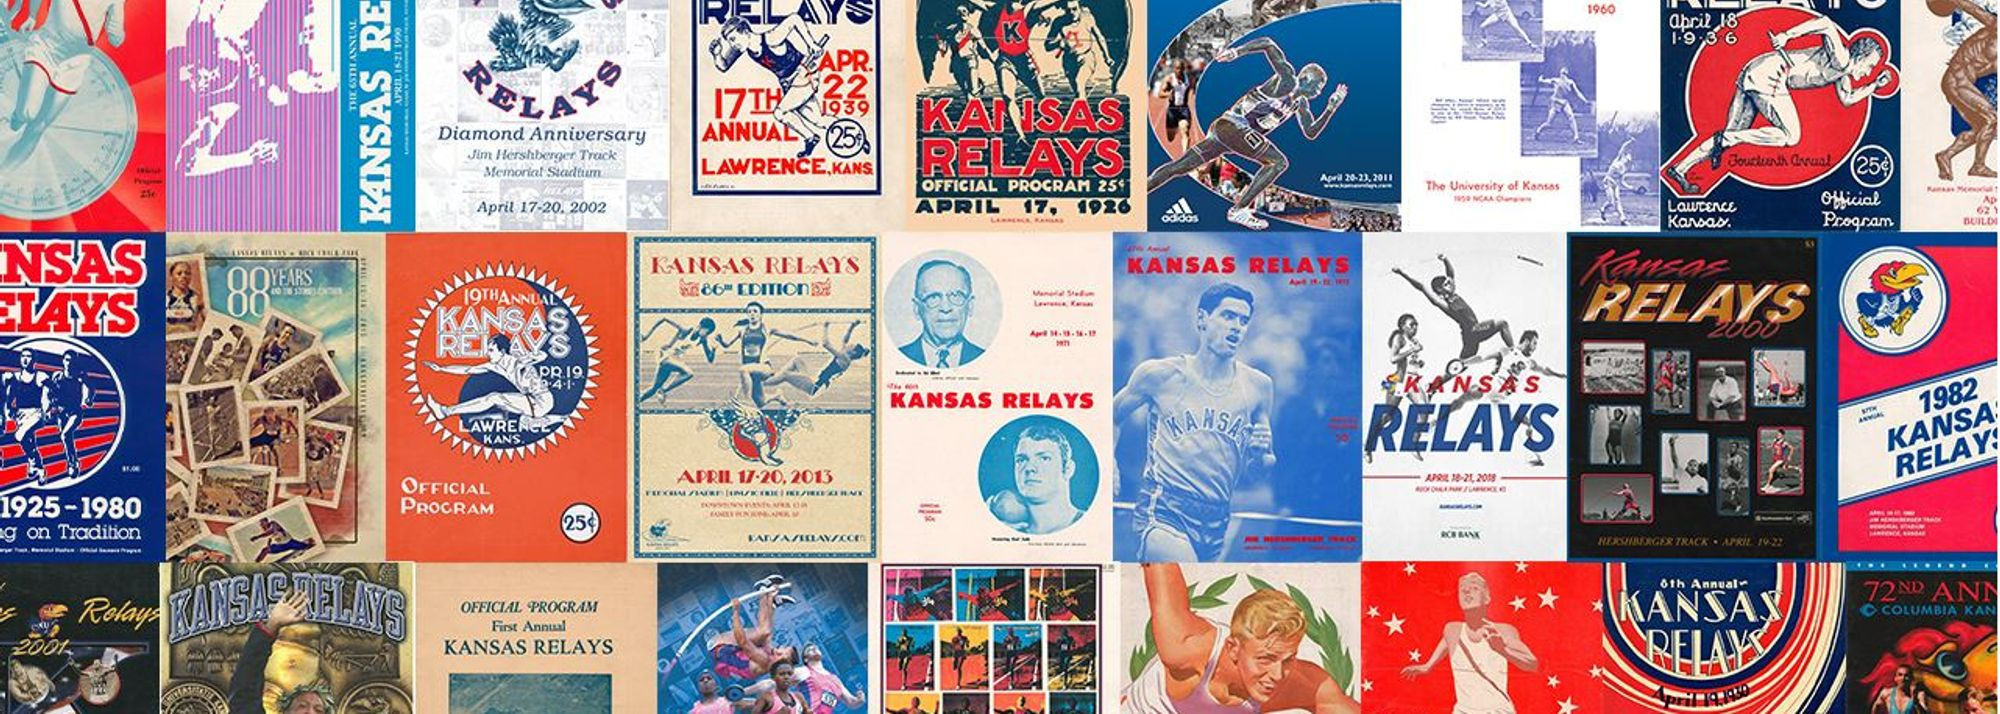 The Kansas Relays is celebrating its centenary this year and 93rd edition of the event ©World Athletics